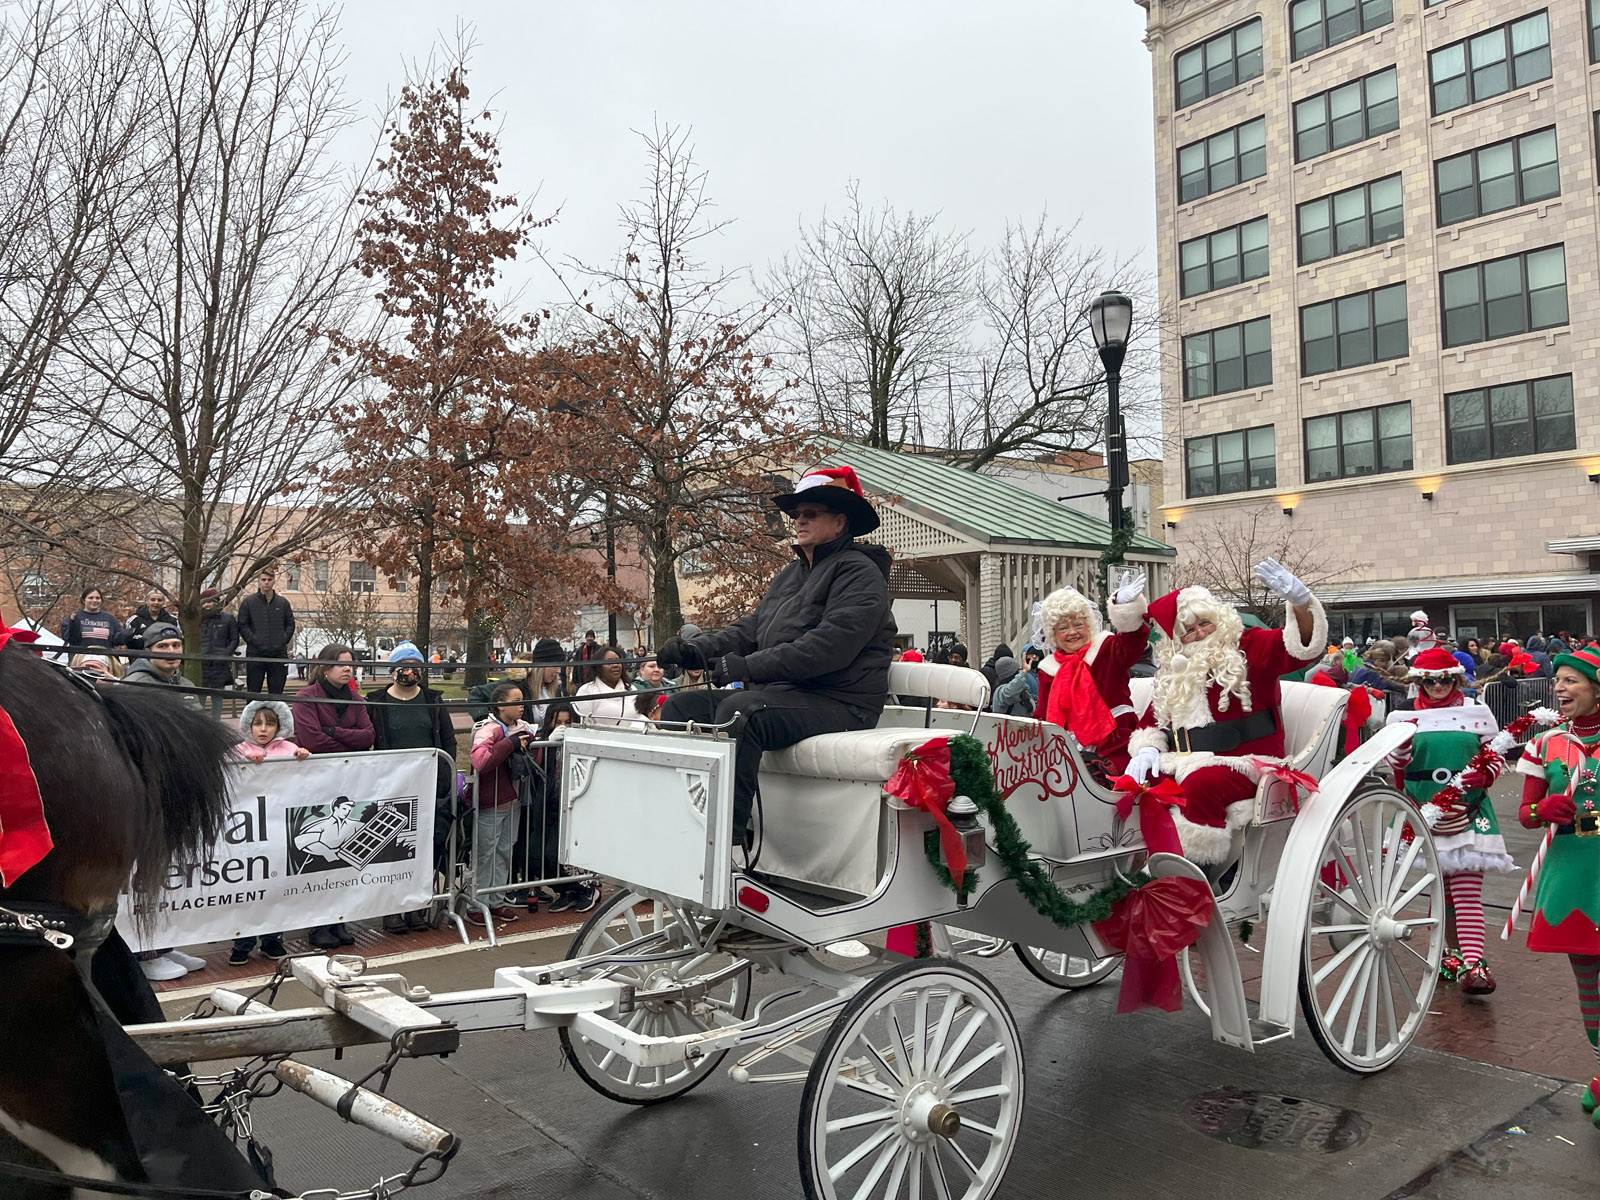 Santa Claus and Mrs. Claus ride through the 2022 Downtown Springfield Christmas Parade in a horse-drawn carriage